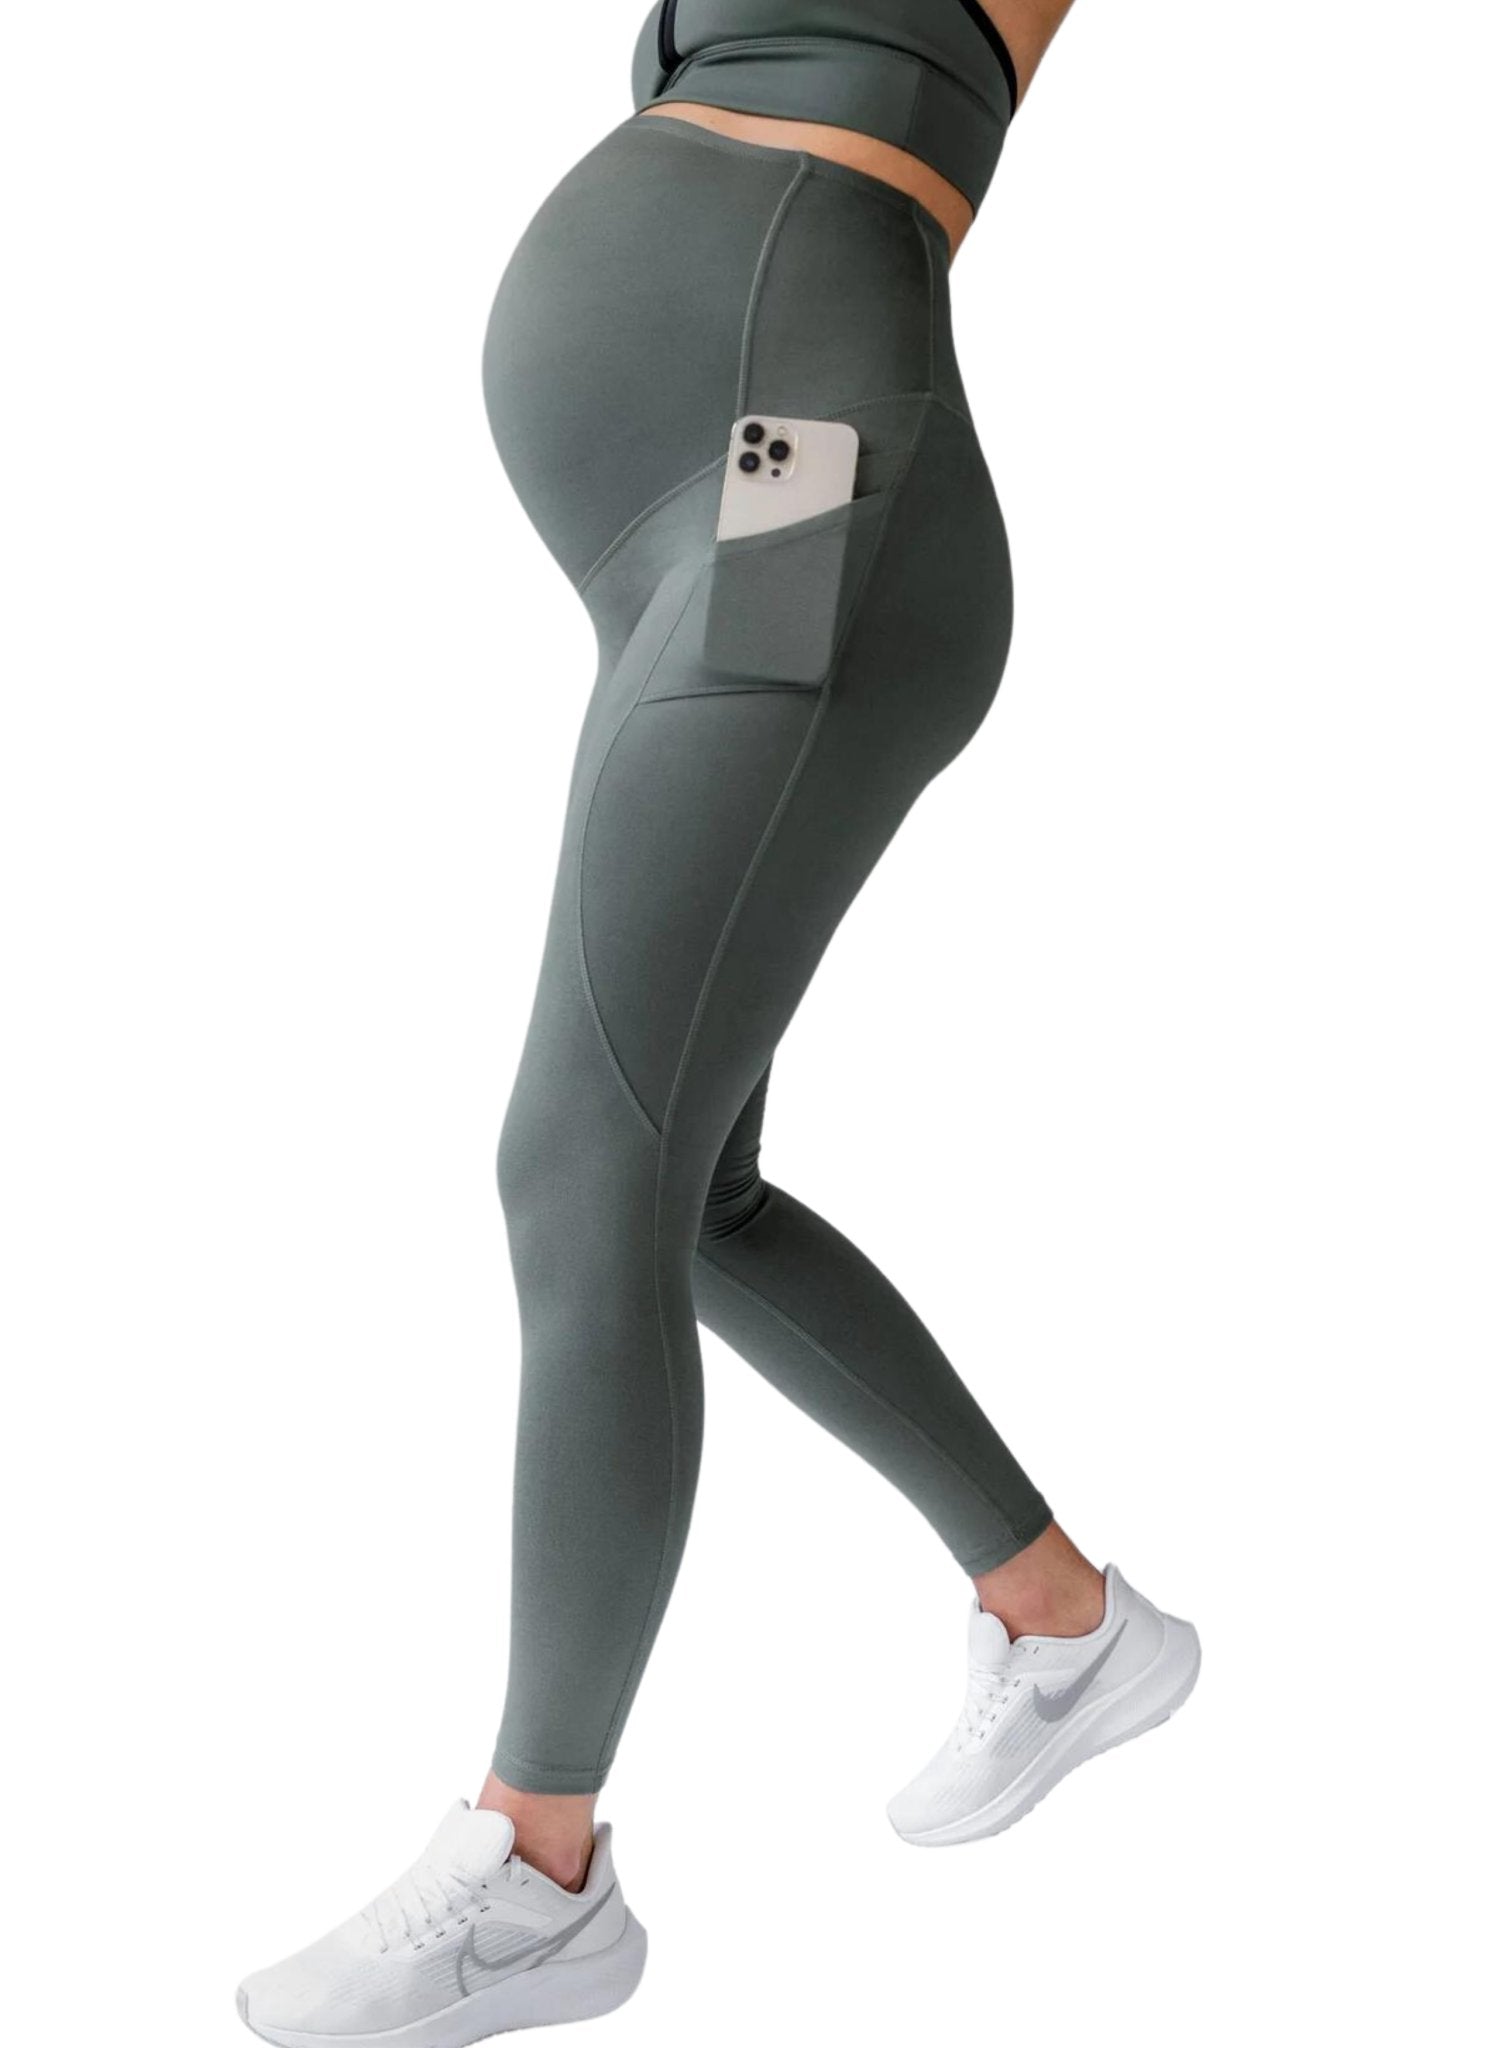 Blanqi Active Maternity Pocket Leggings - Olive Green - Mums and Bumps